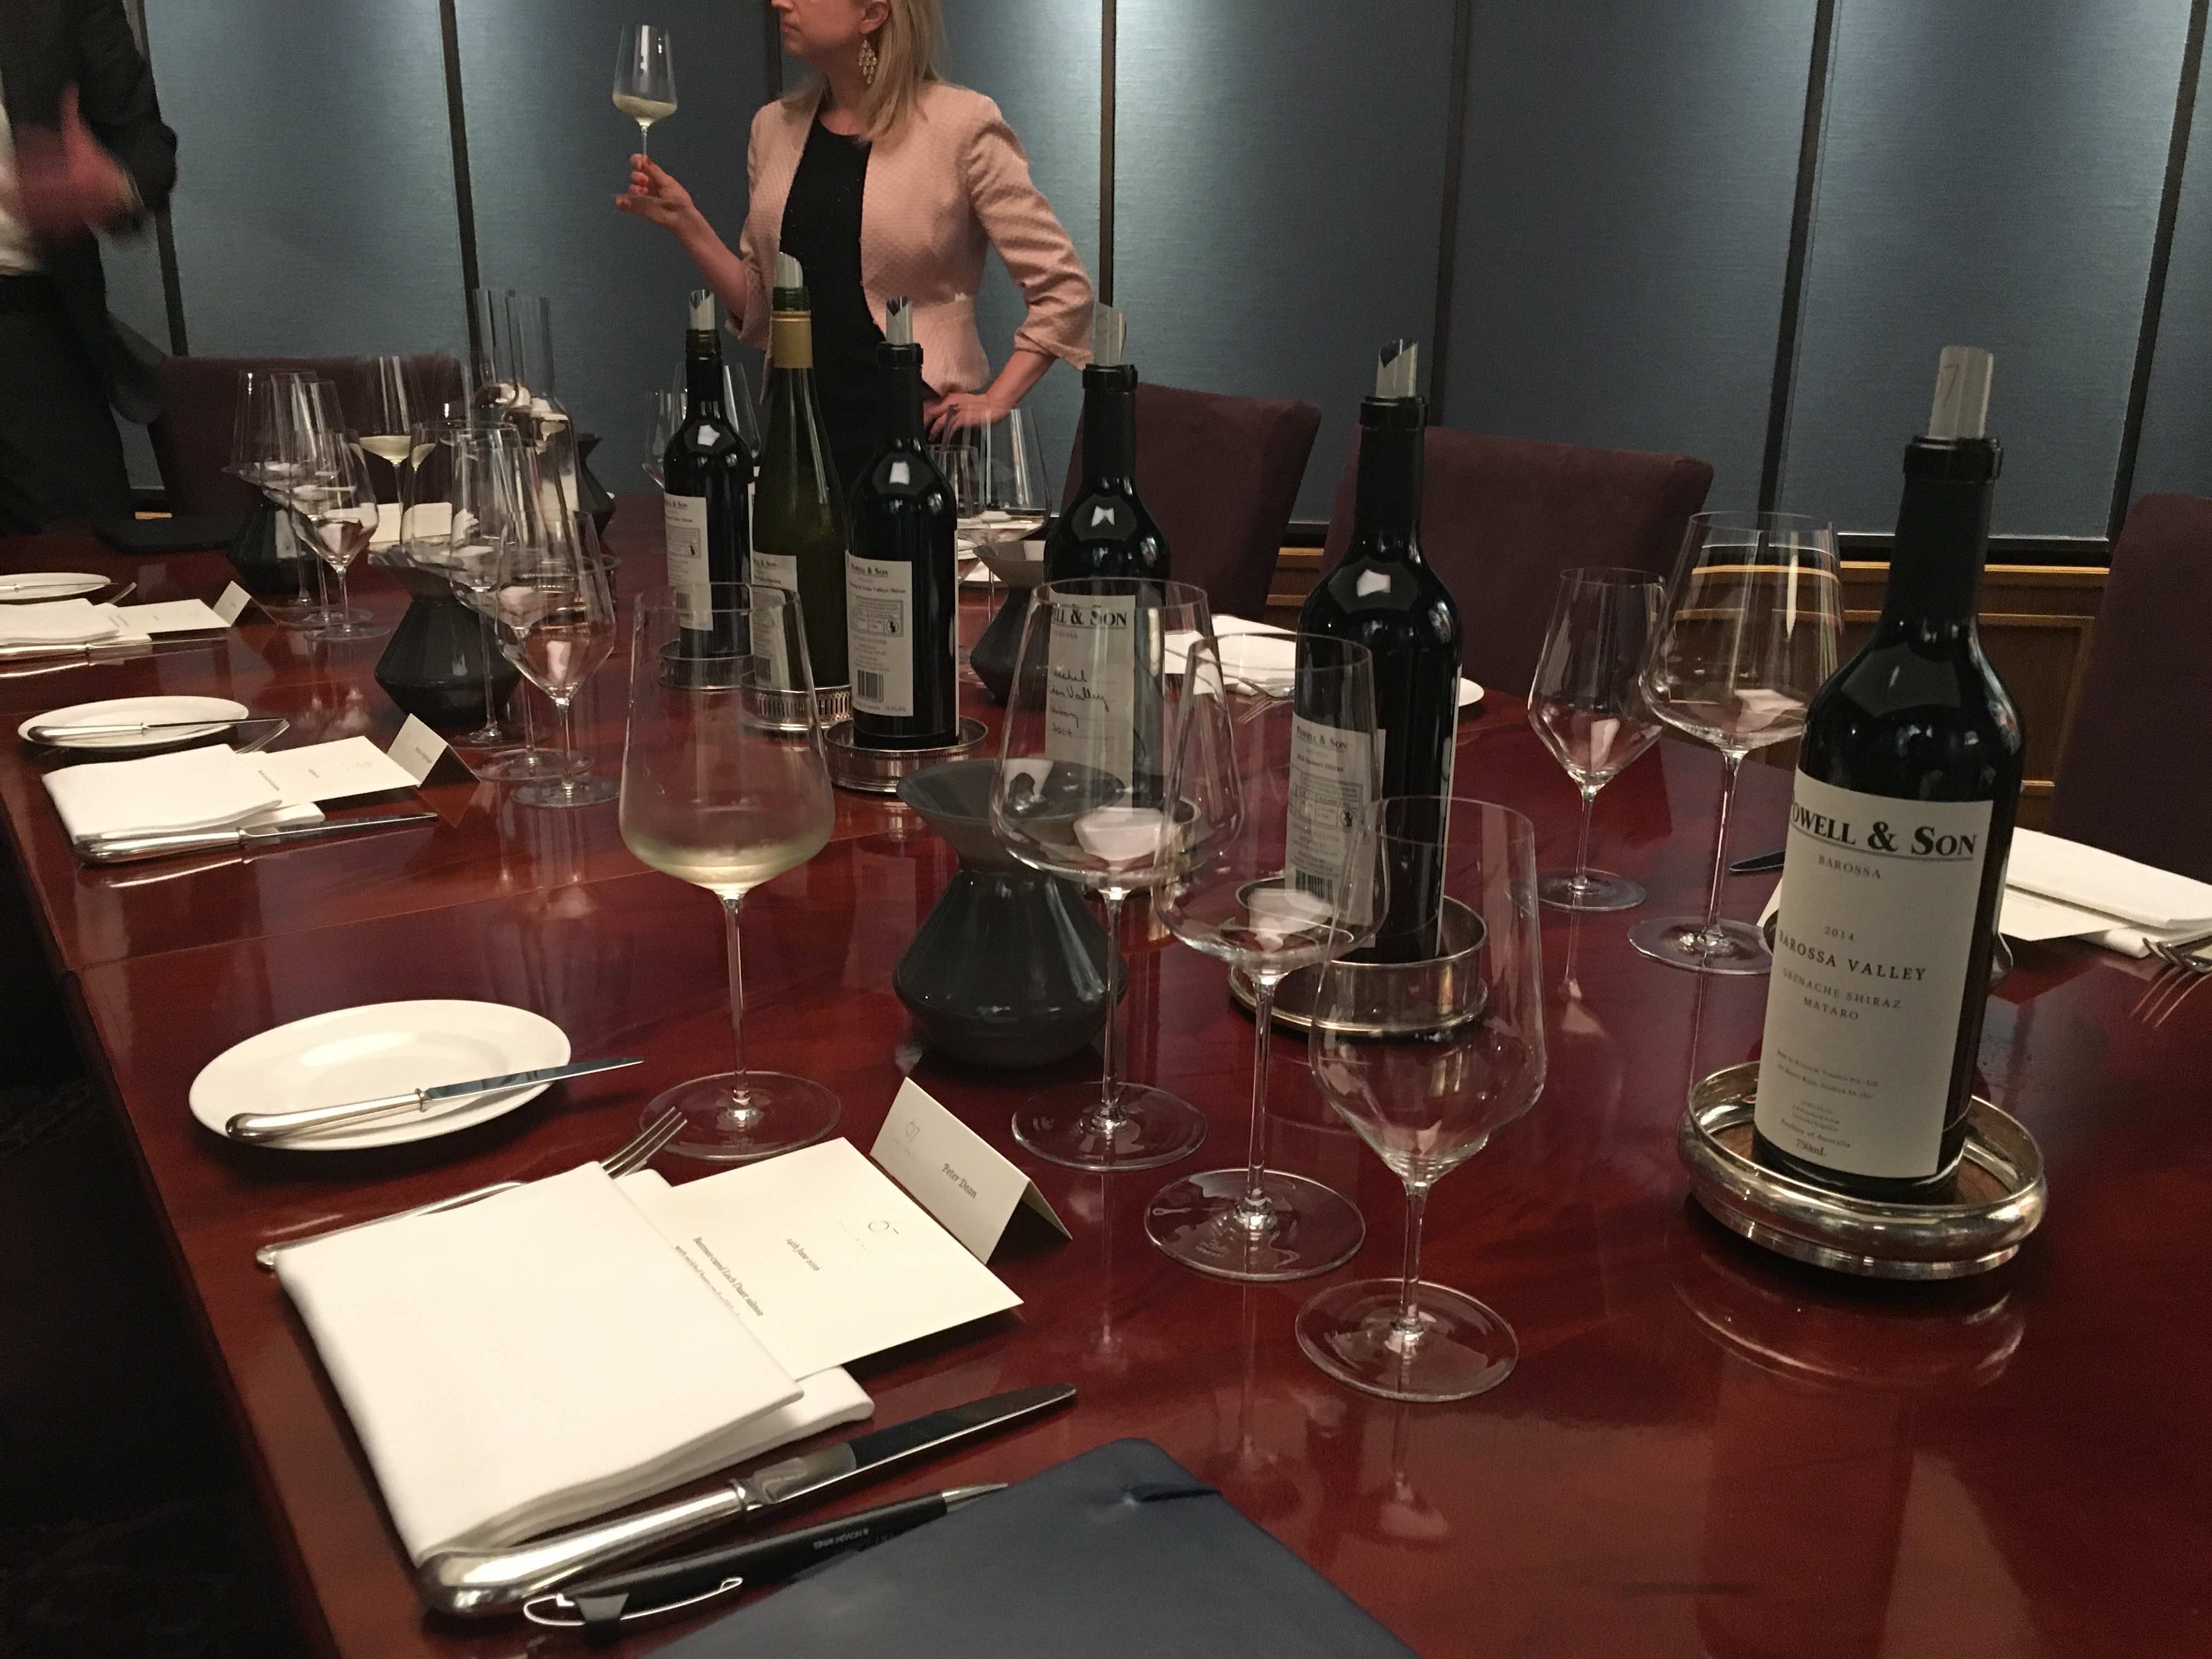 Tasting Powell & Son’s new range of Shiraz and Riesling